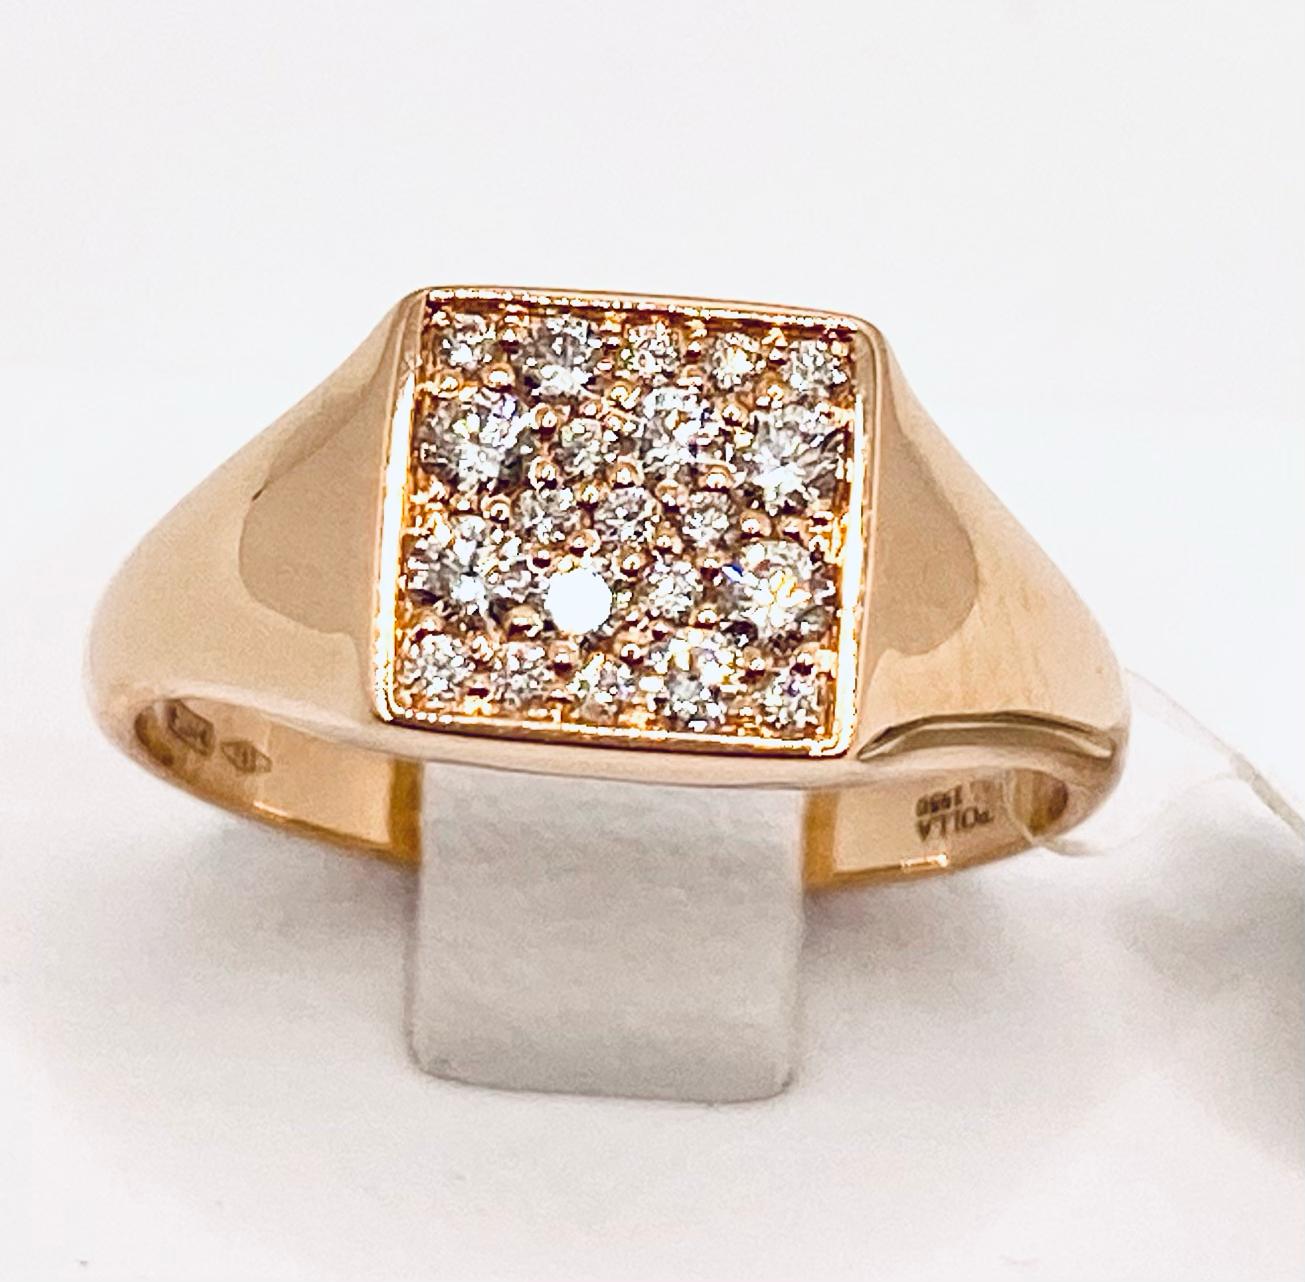 Chevalier ring with diamonds art.634A01DP